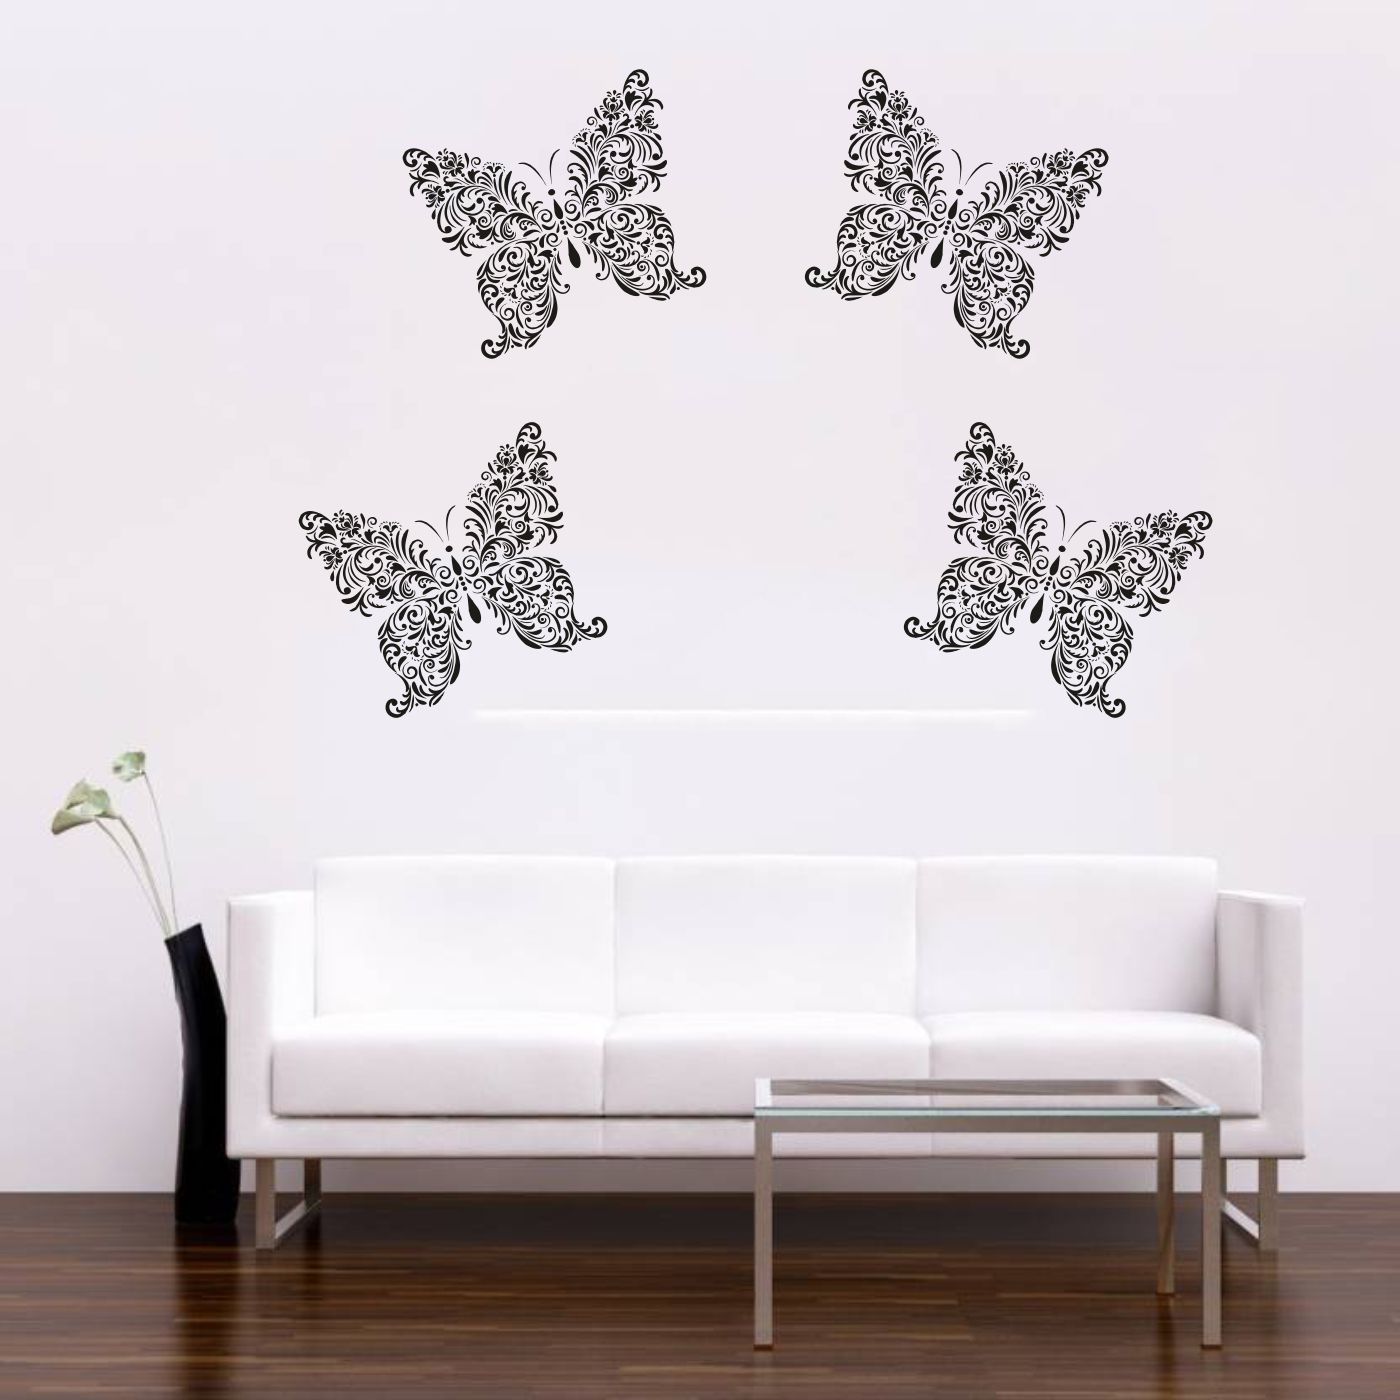 ORKA Butterfly Theme Wall Decal Sticker 33  